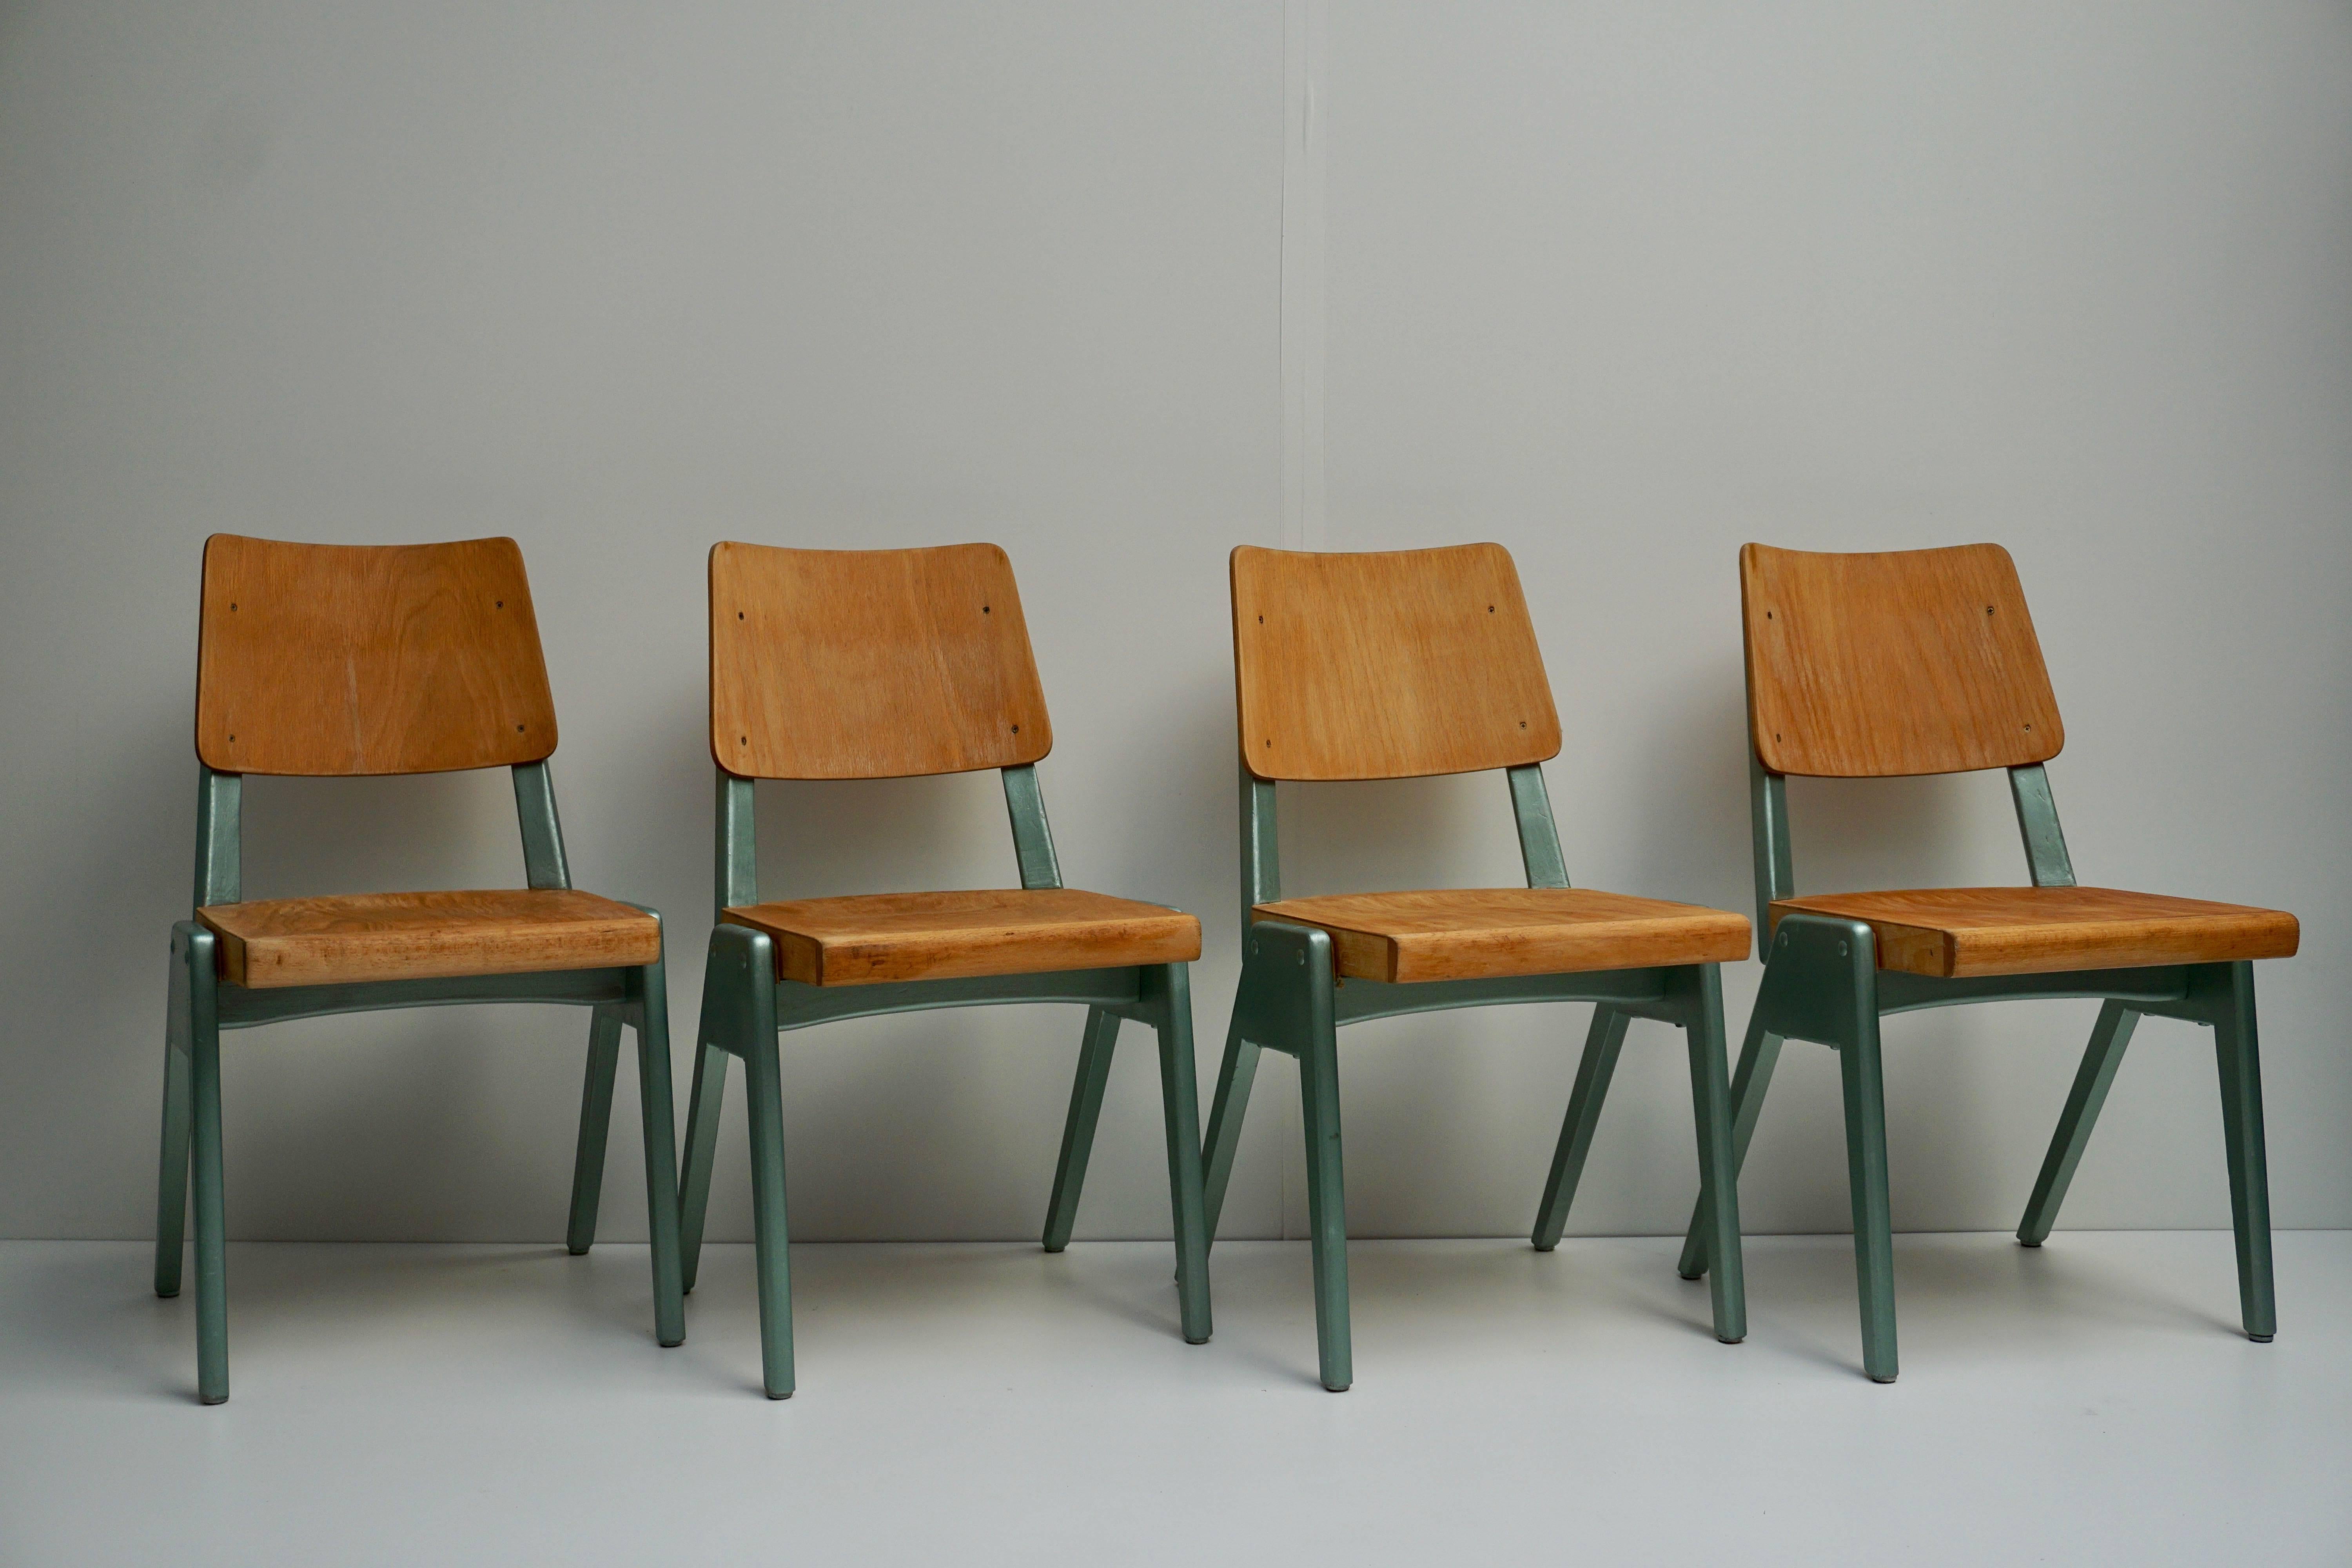 Set of four dining chairs,1950s.
Measures: Height seat 42 cm.